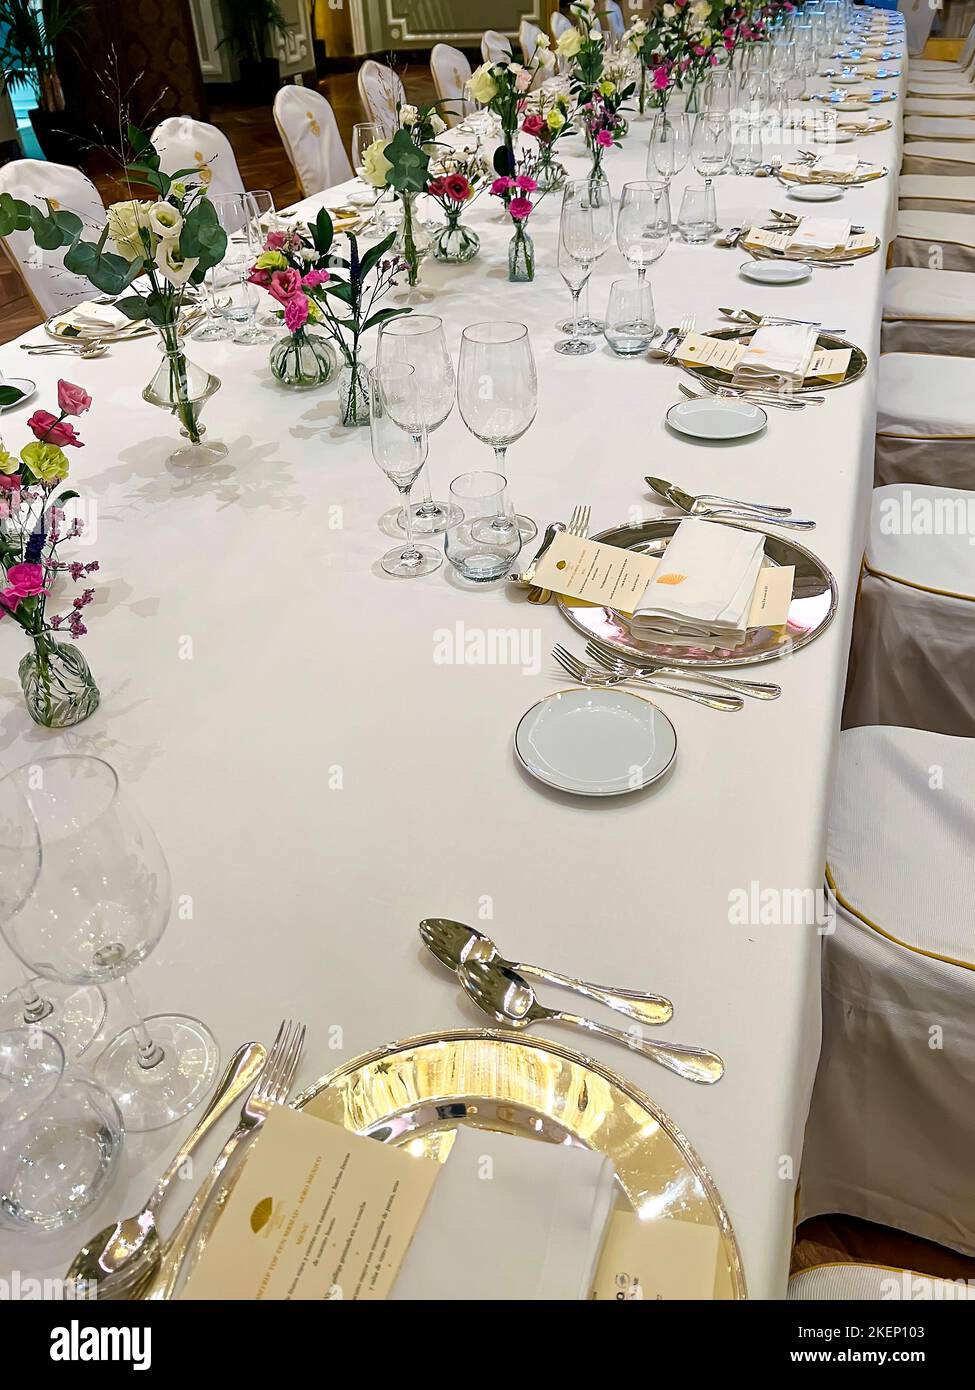 Formal layout on dinner table Stock Photo